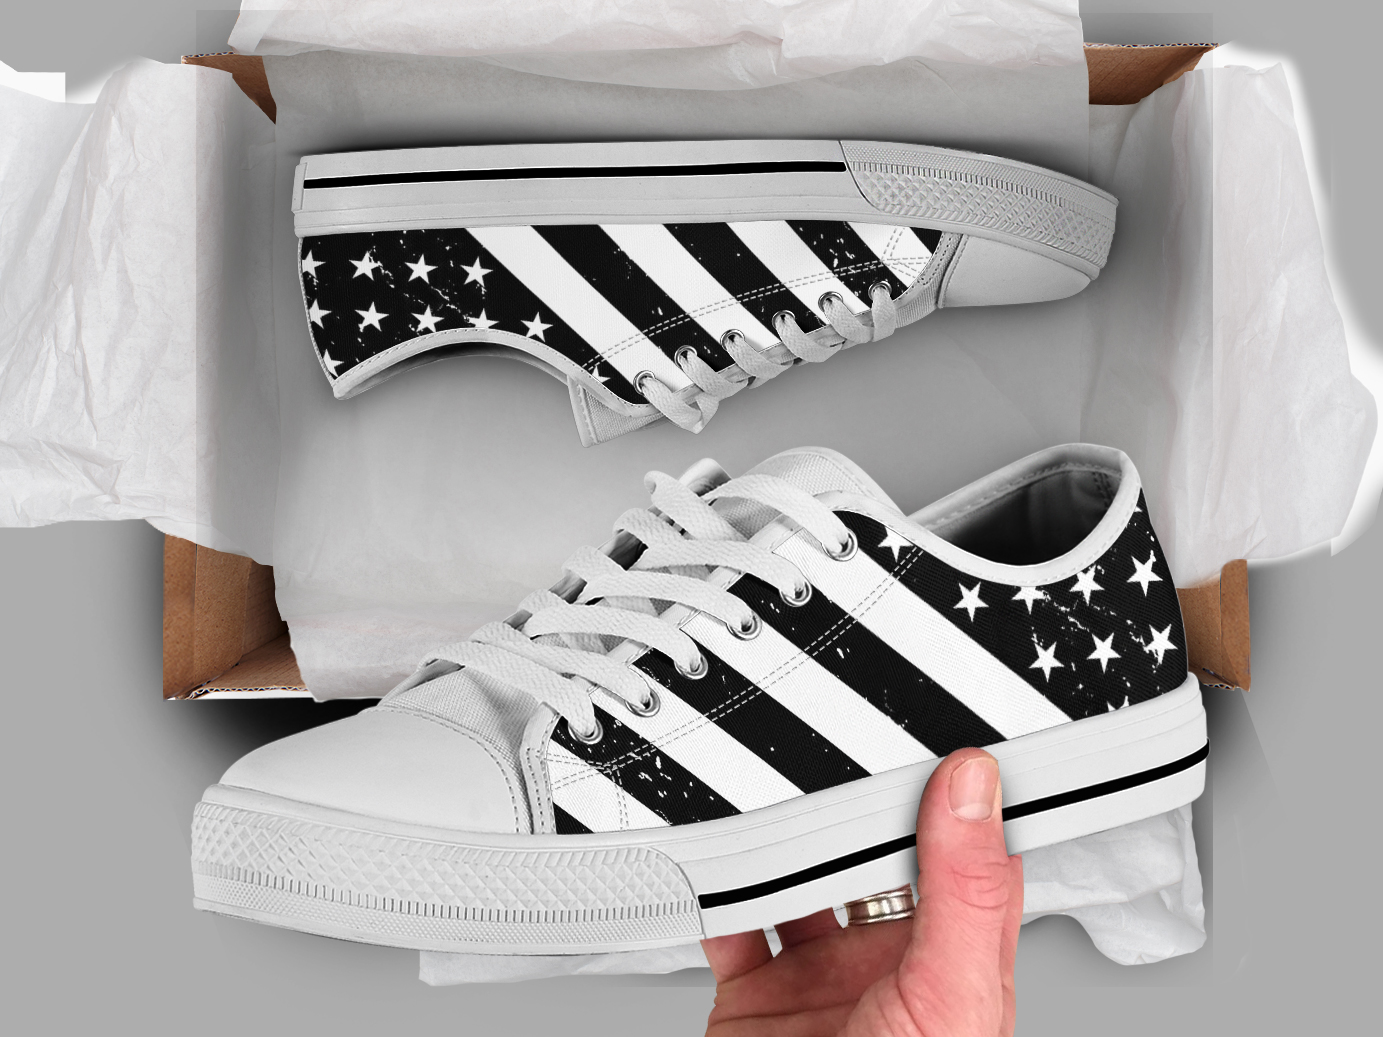 Black US Flag Shoes | Custom Low Tops Sneakers For Kids & Adults